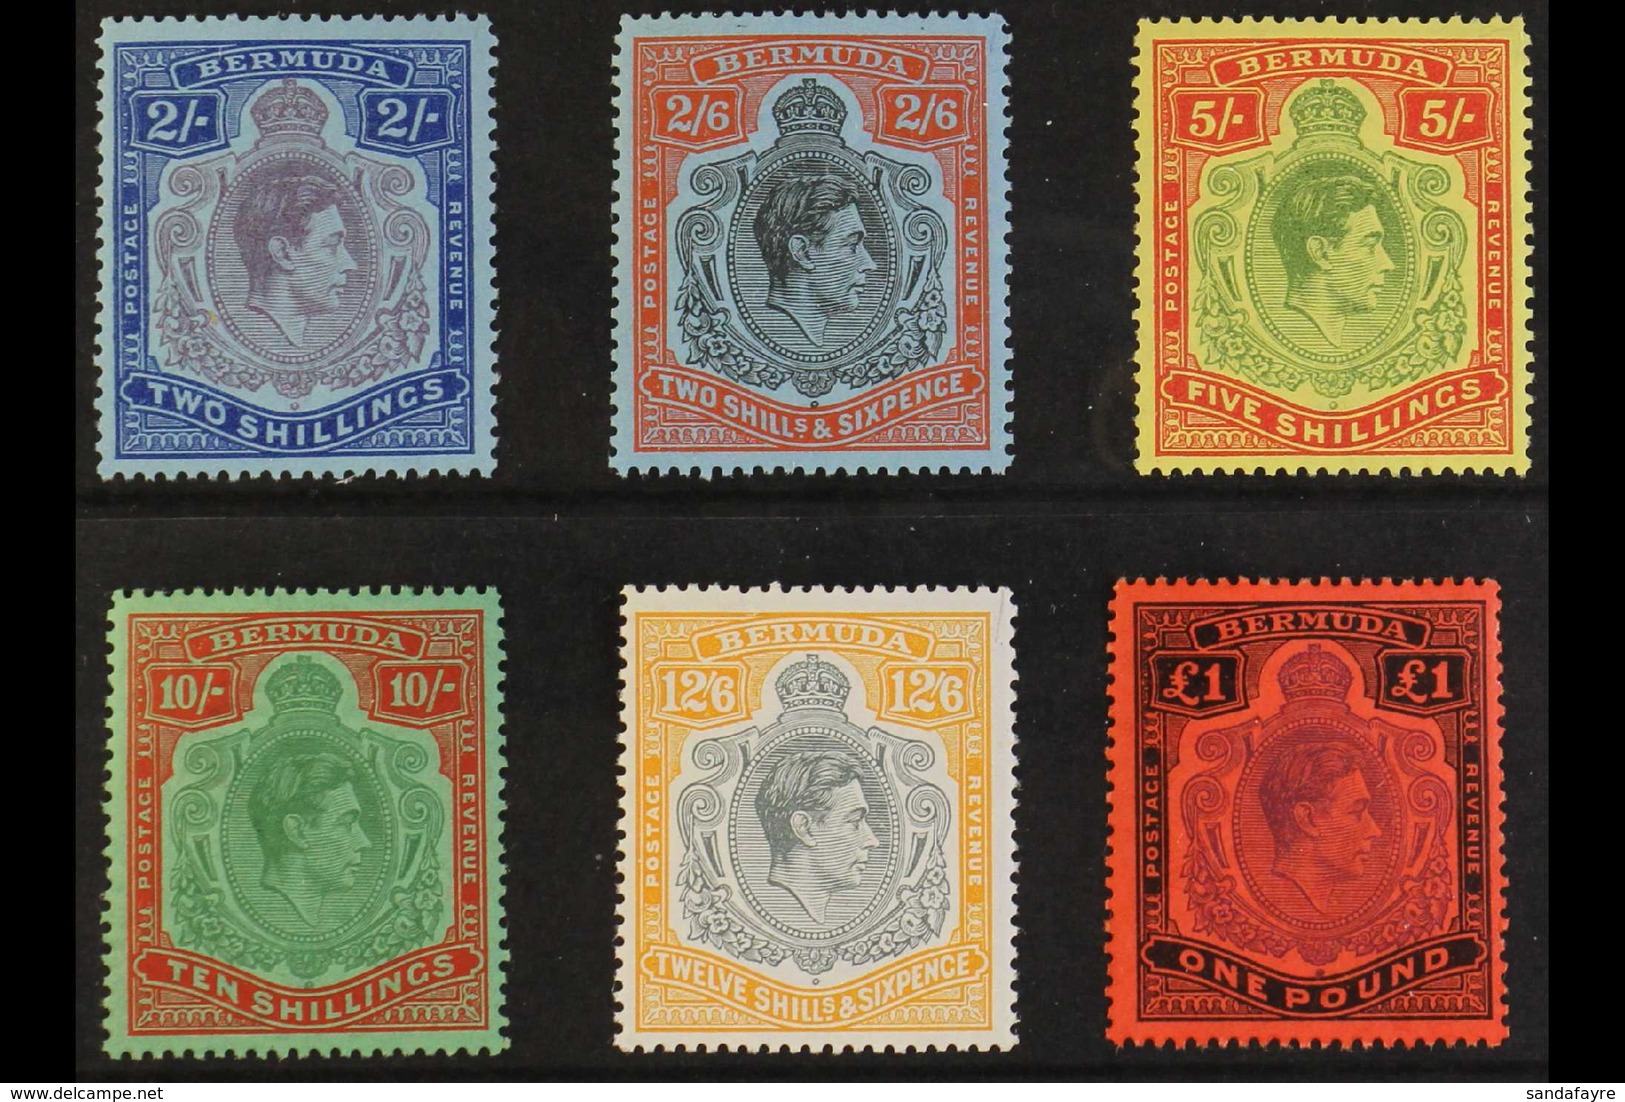 1938-53 KEY PLATE NHM COLLECTION Presented On A Stock Card That Includes One Perf 13 Example Of Each Value, 2s (SG 116e) - Bermuda